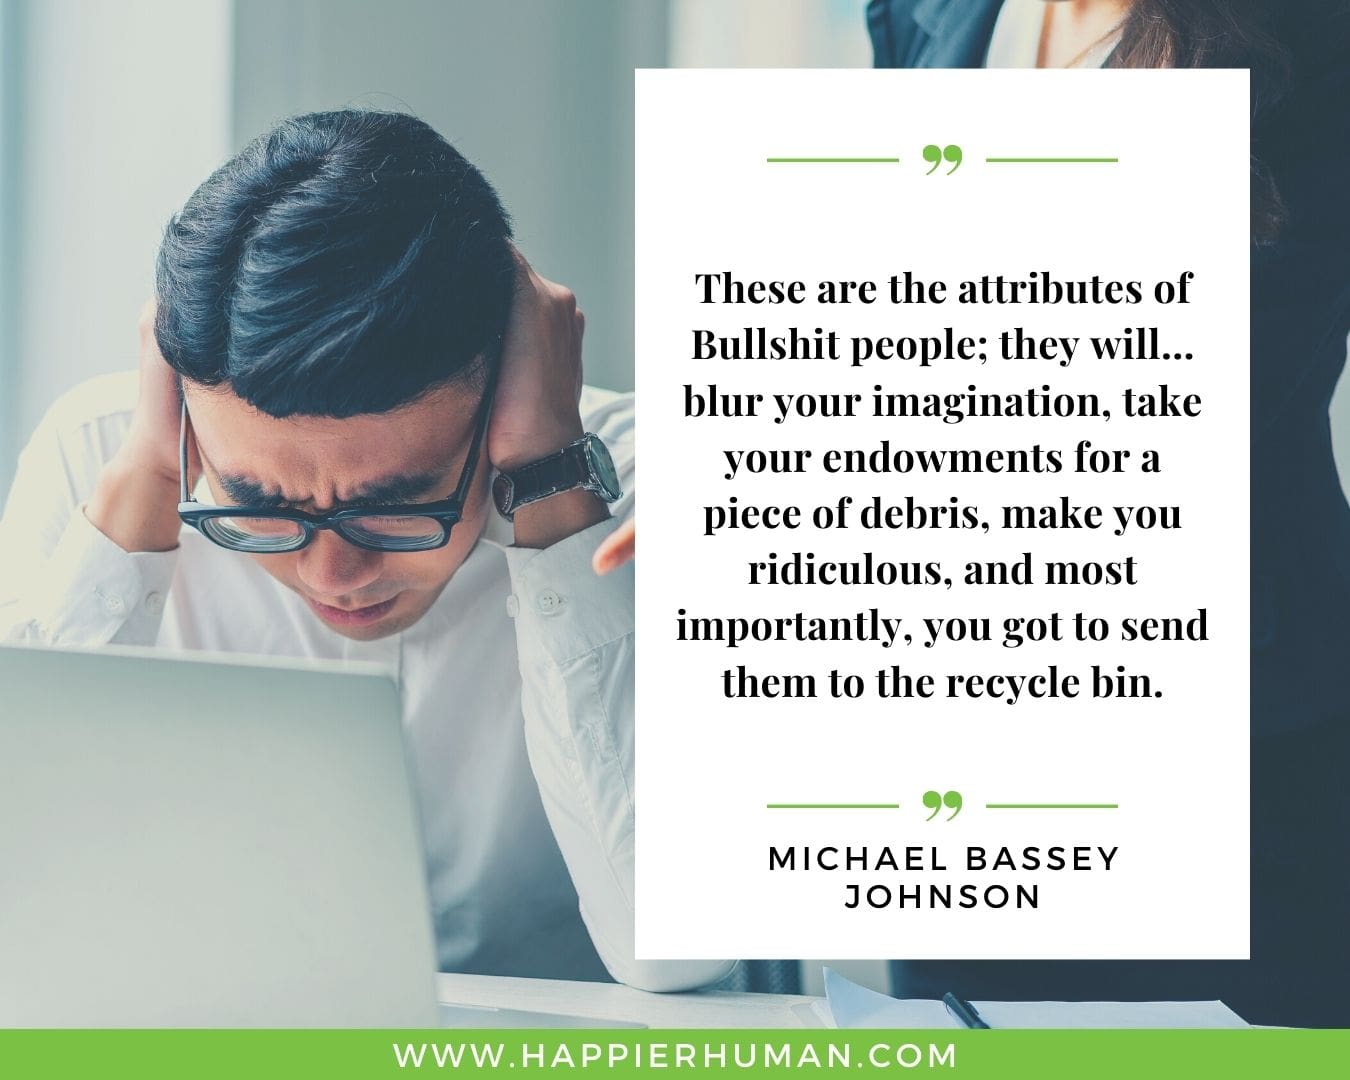 Toxic People Quotes - “These are the attributes of Bullshit people; they will…blur your imagination, take your endowments for a piece of debris, make you ridiculous, and most importantly, you got to send them to the recycle bin.” – Michael Bassey Johnson